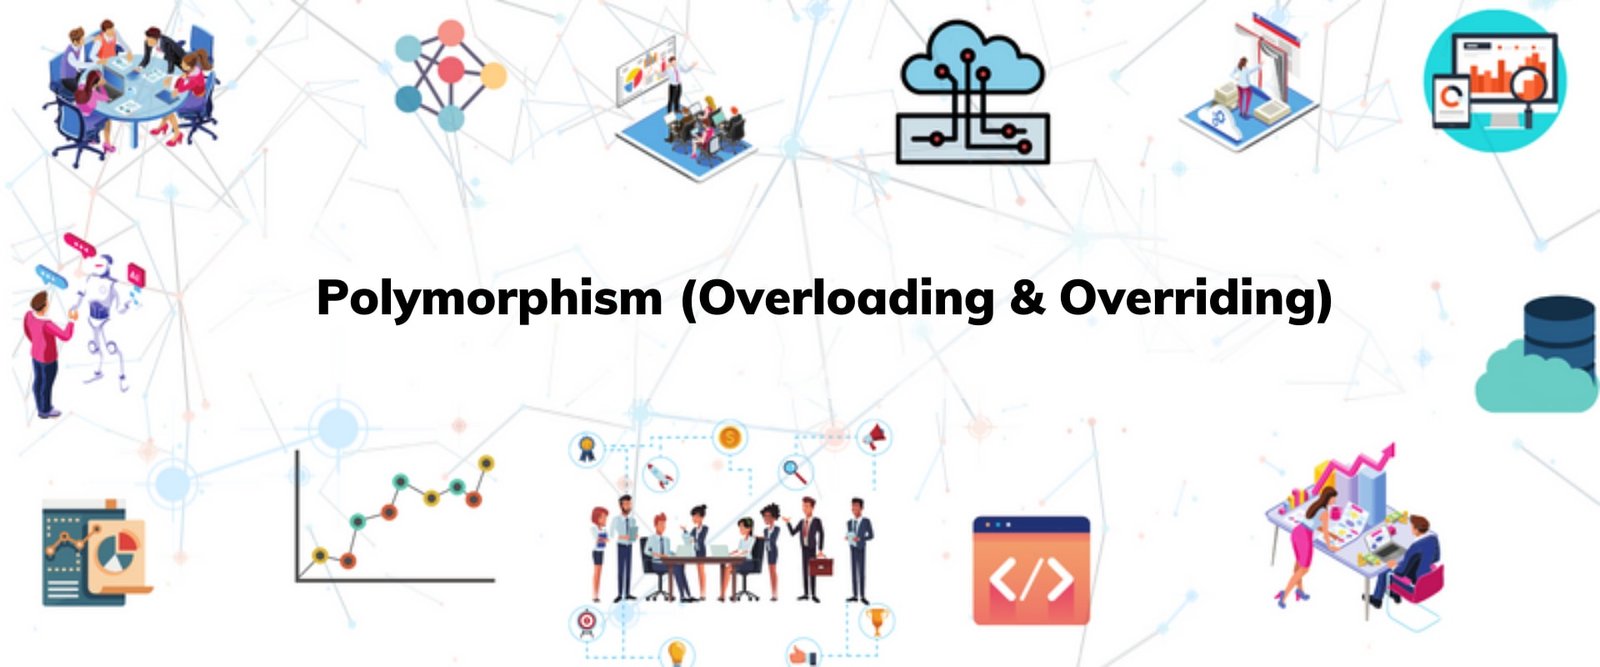 Overloading and Overriding - Whizlabs Blog